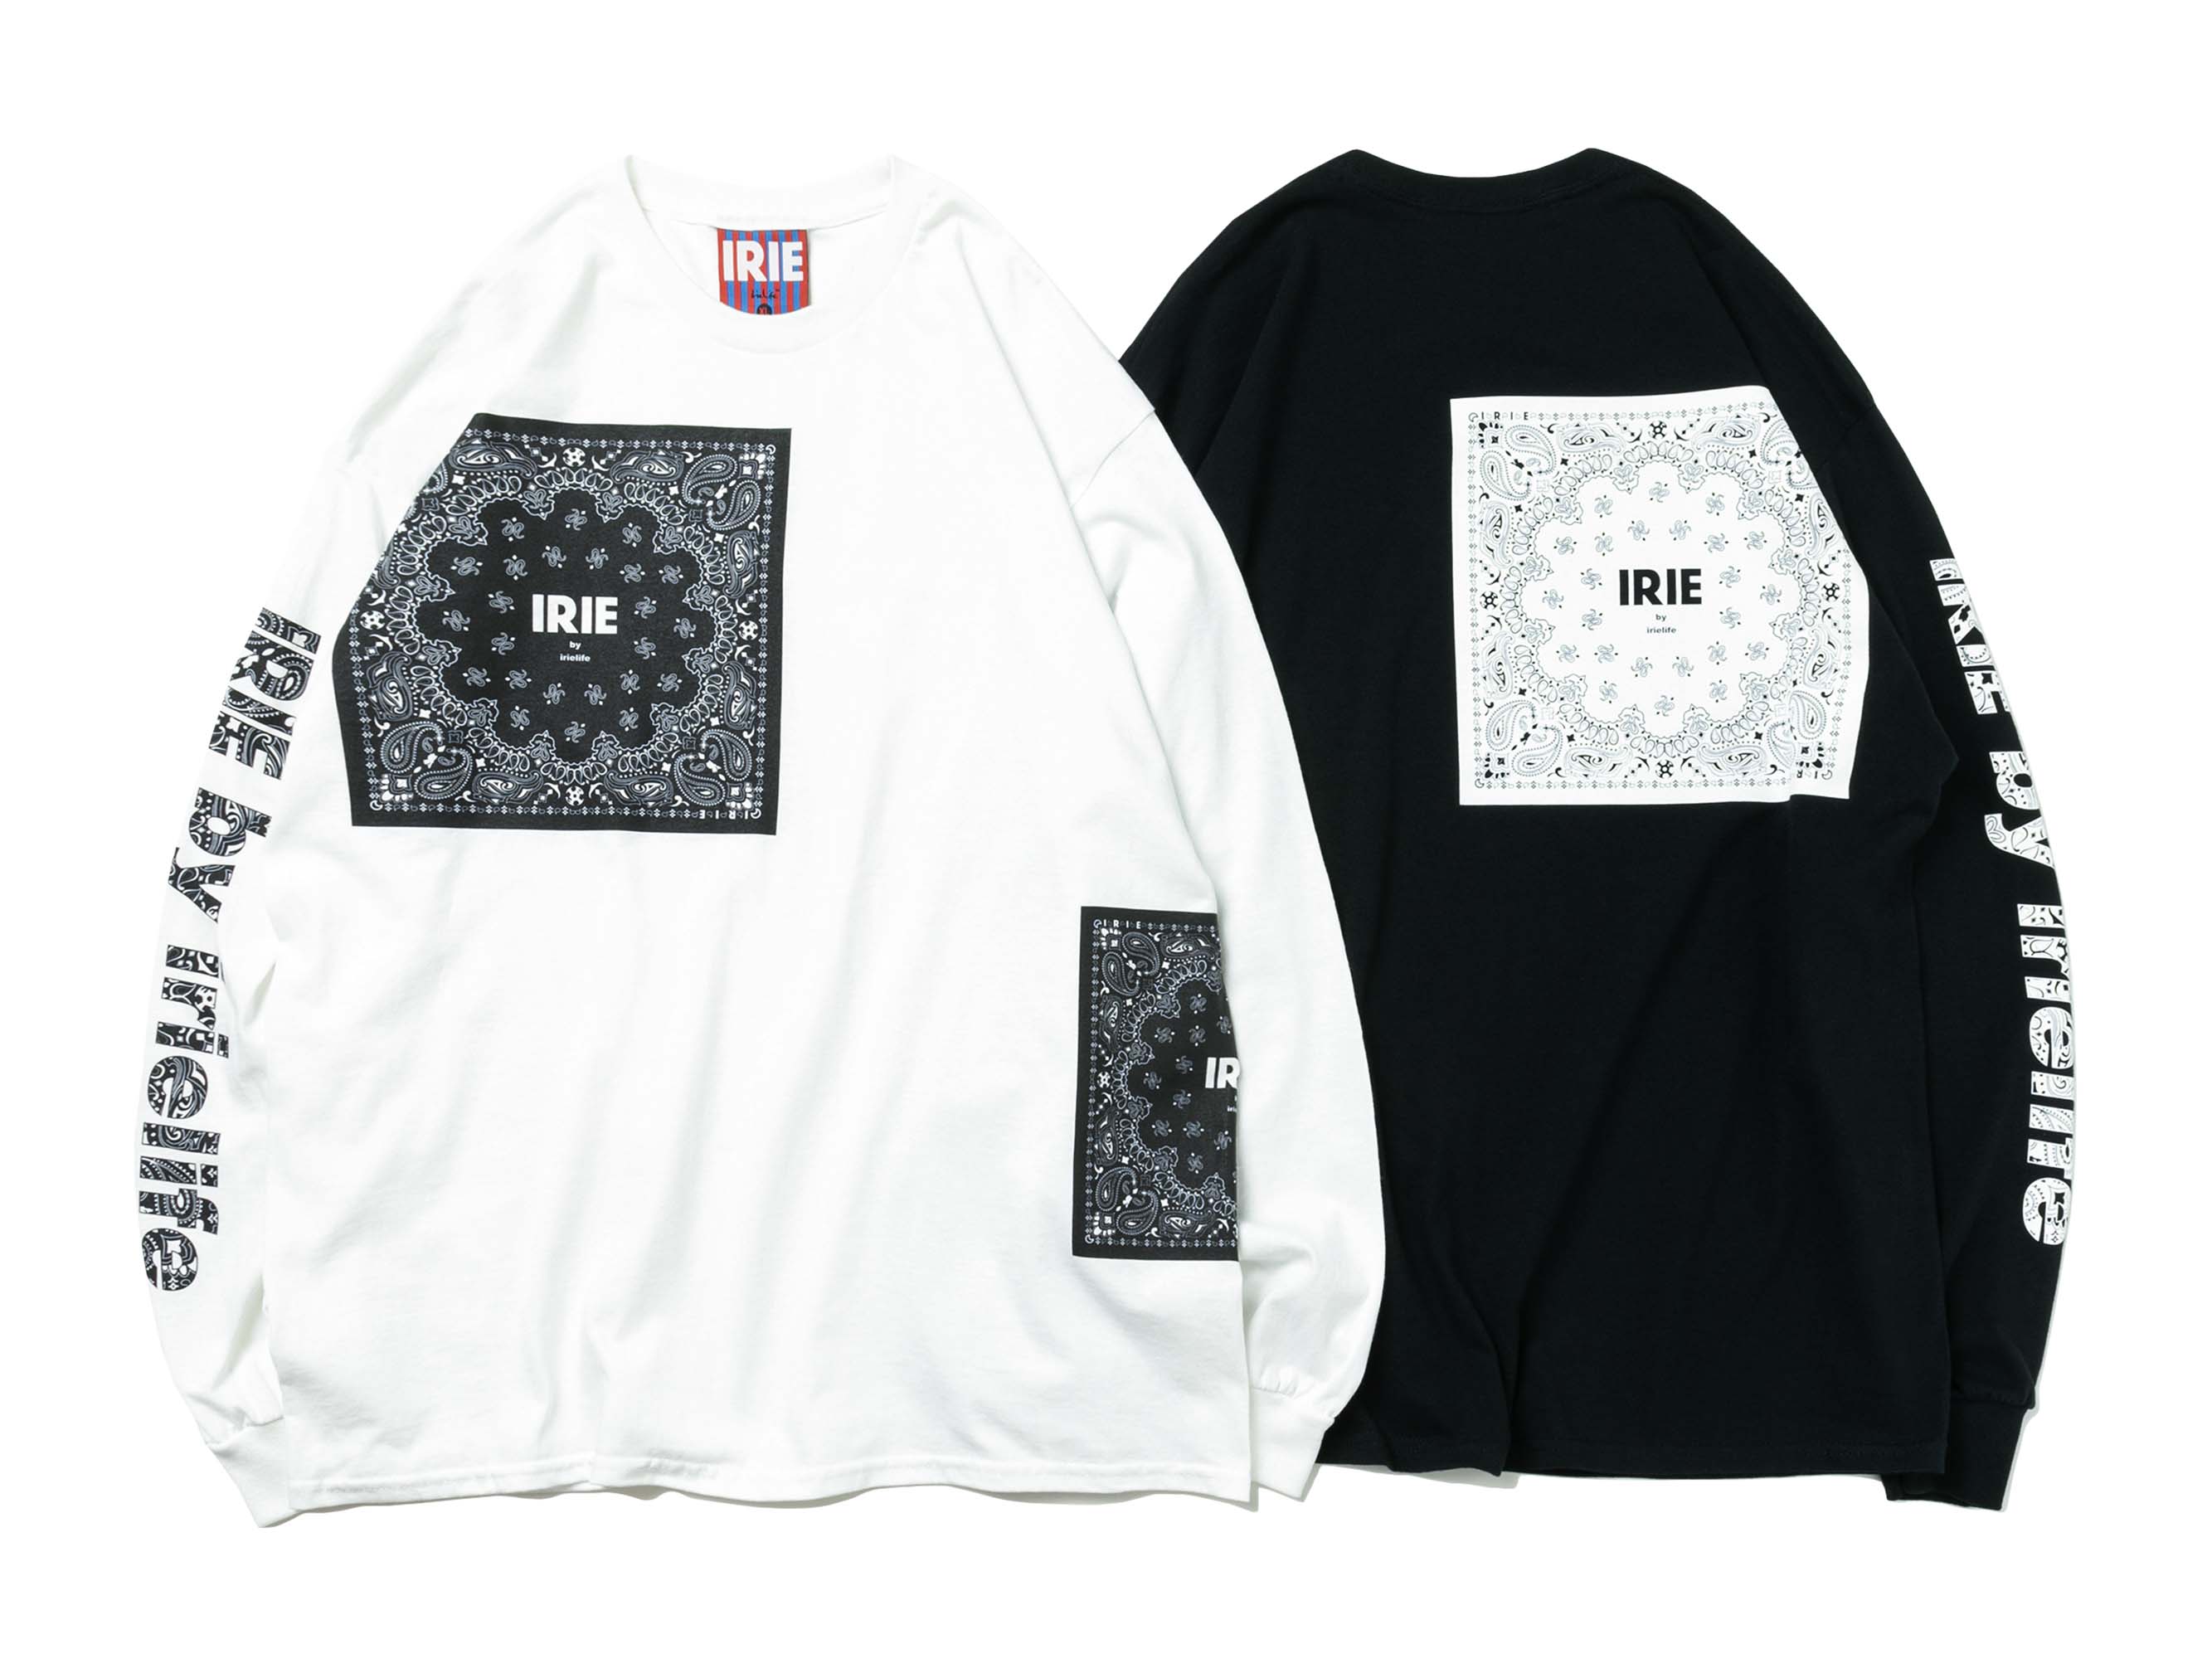 PAISLEY L/S TEE - IRIE by irielife